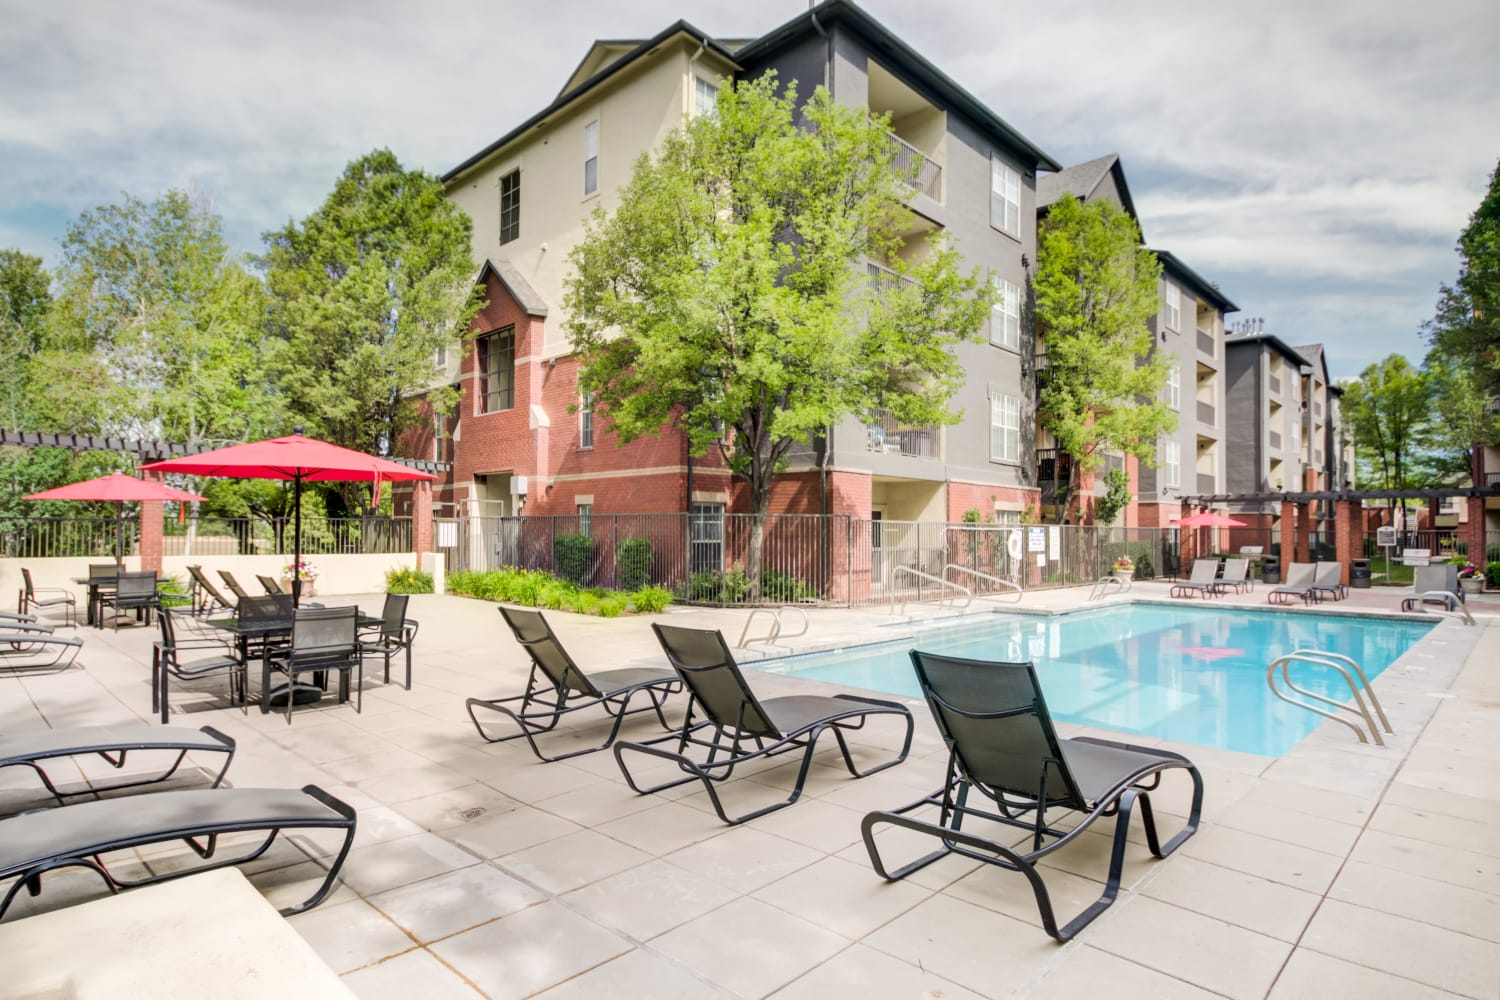 Apartment buildings in the background with lounge chairs and community pool in the foreground at Irving Schoolhouse Apartments in Salt Lake City, Utah